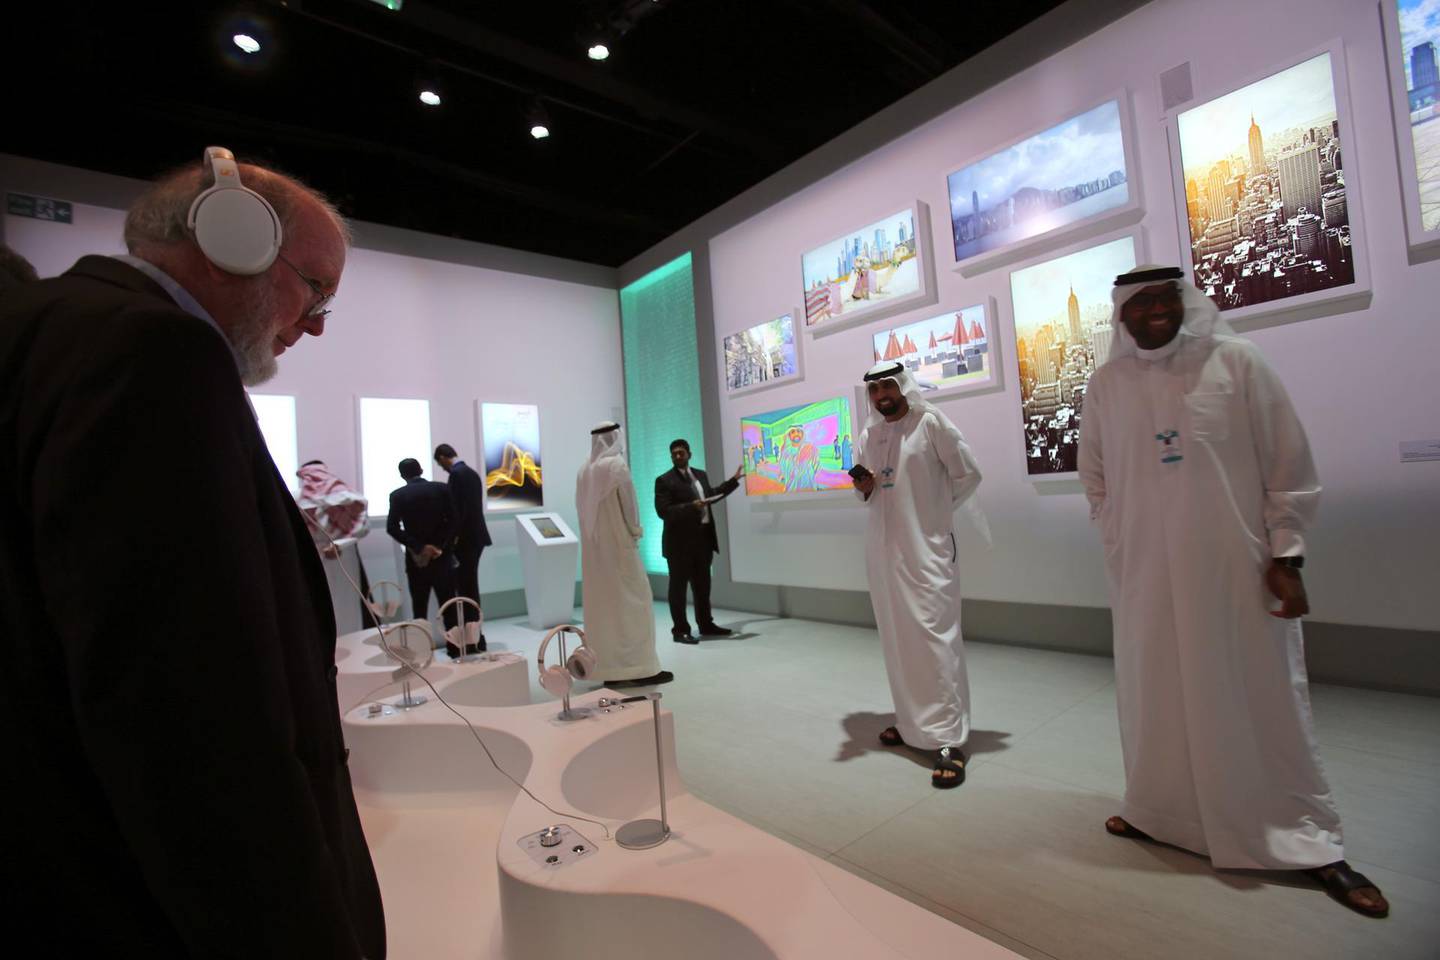 Governments staffs from all over the world visit the Museum of the Future at the World Government Summit in Dubai, United Arab Emirates, Monday, Feb. 12, 2018. (AP Photo/Kamran Jebreili)